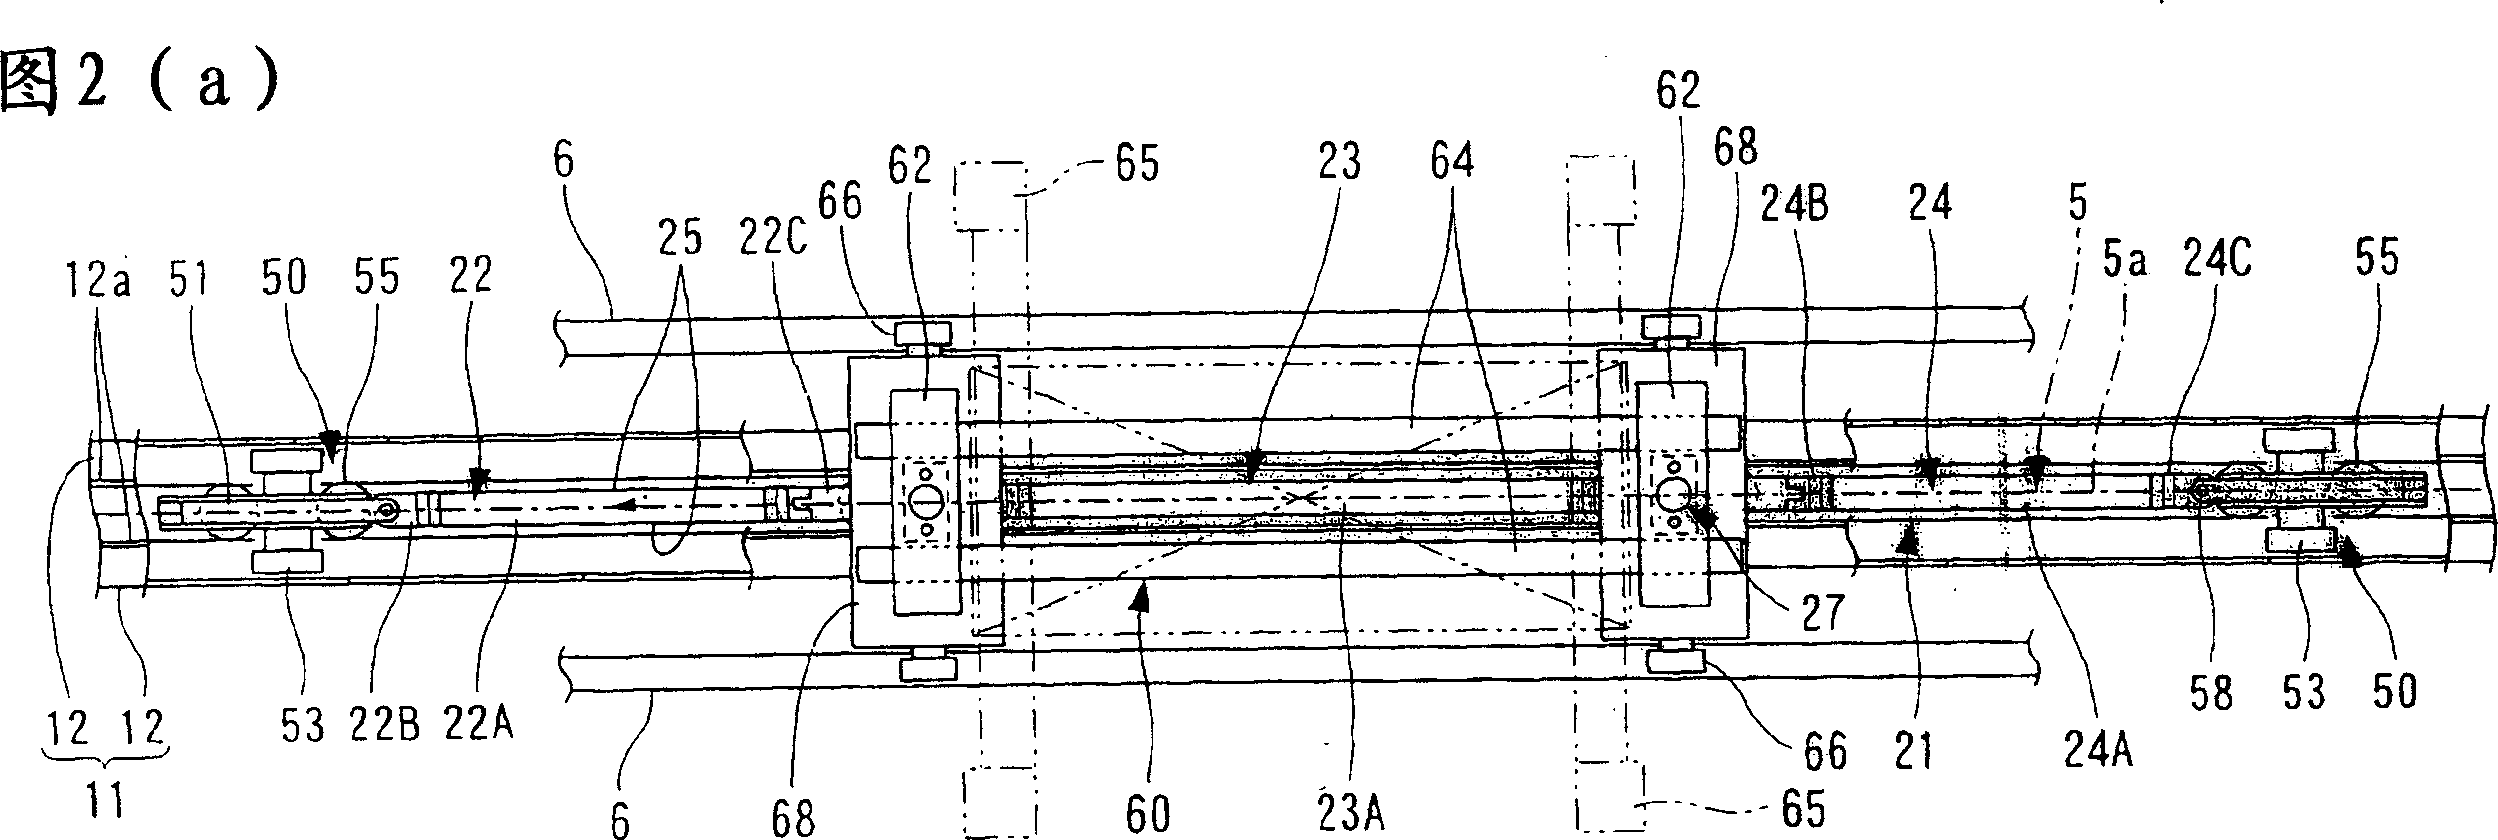 Conveyance apparatus using movable bodies